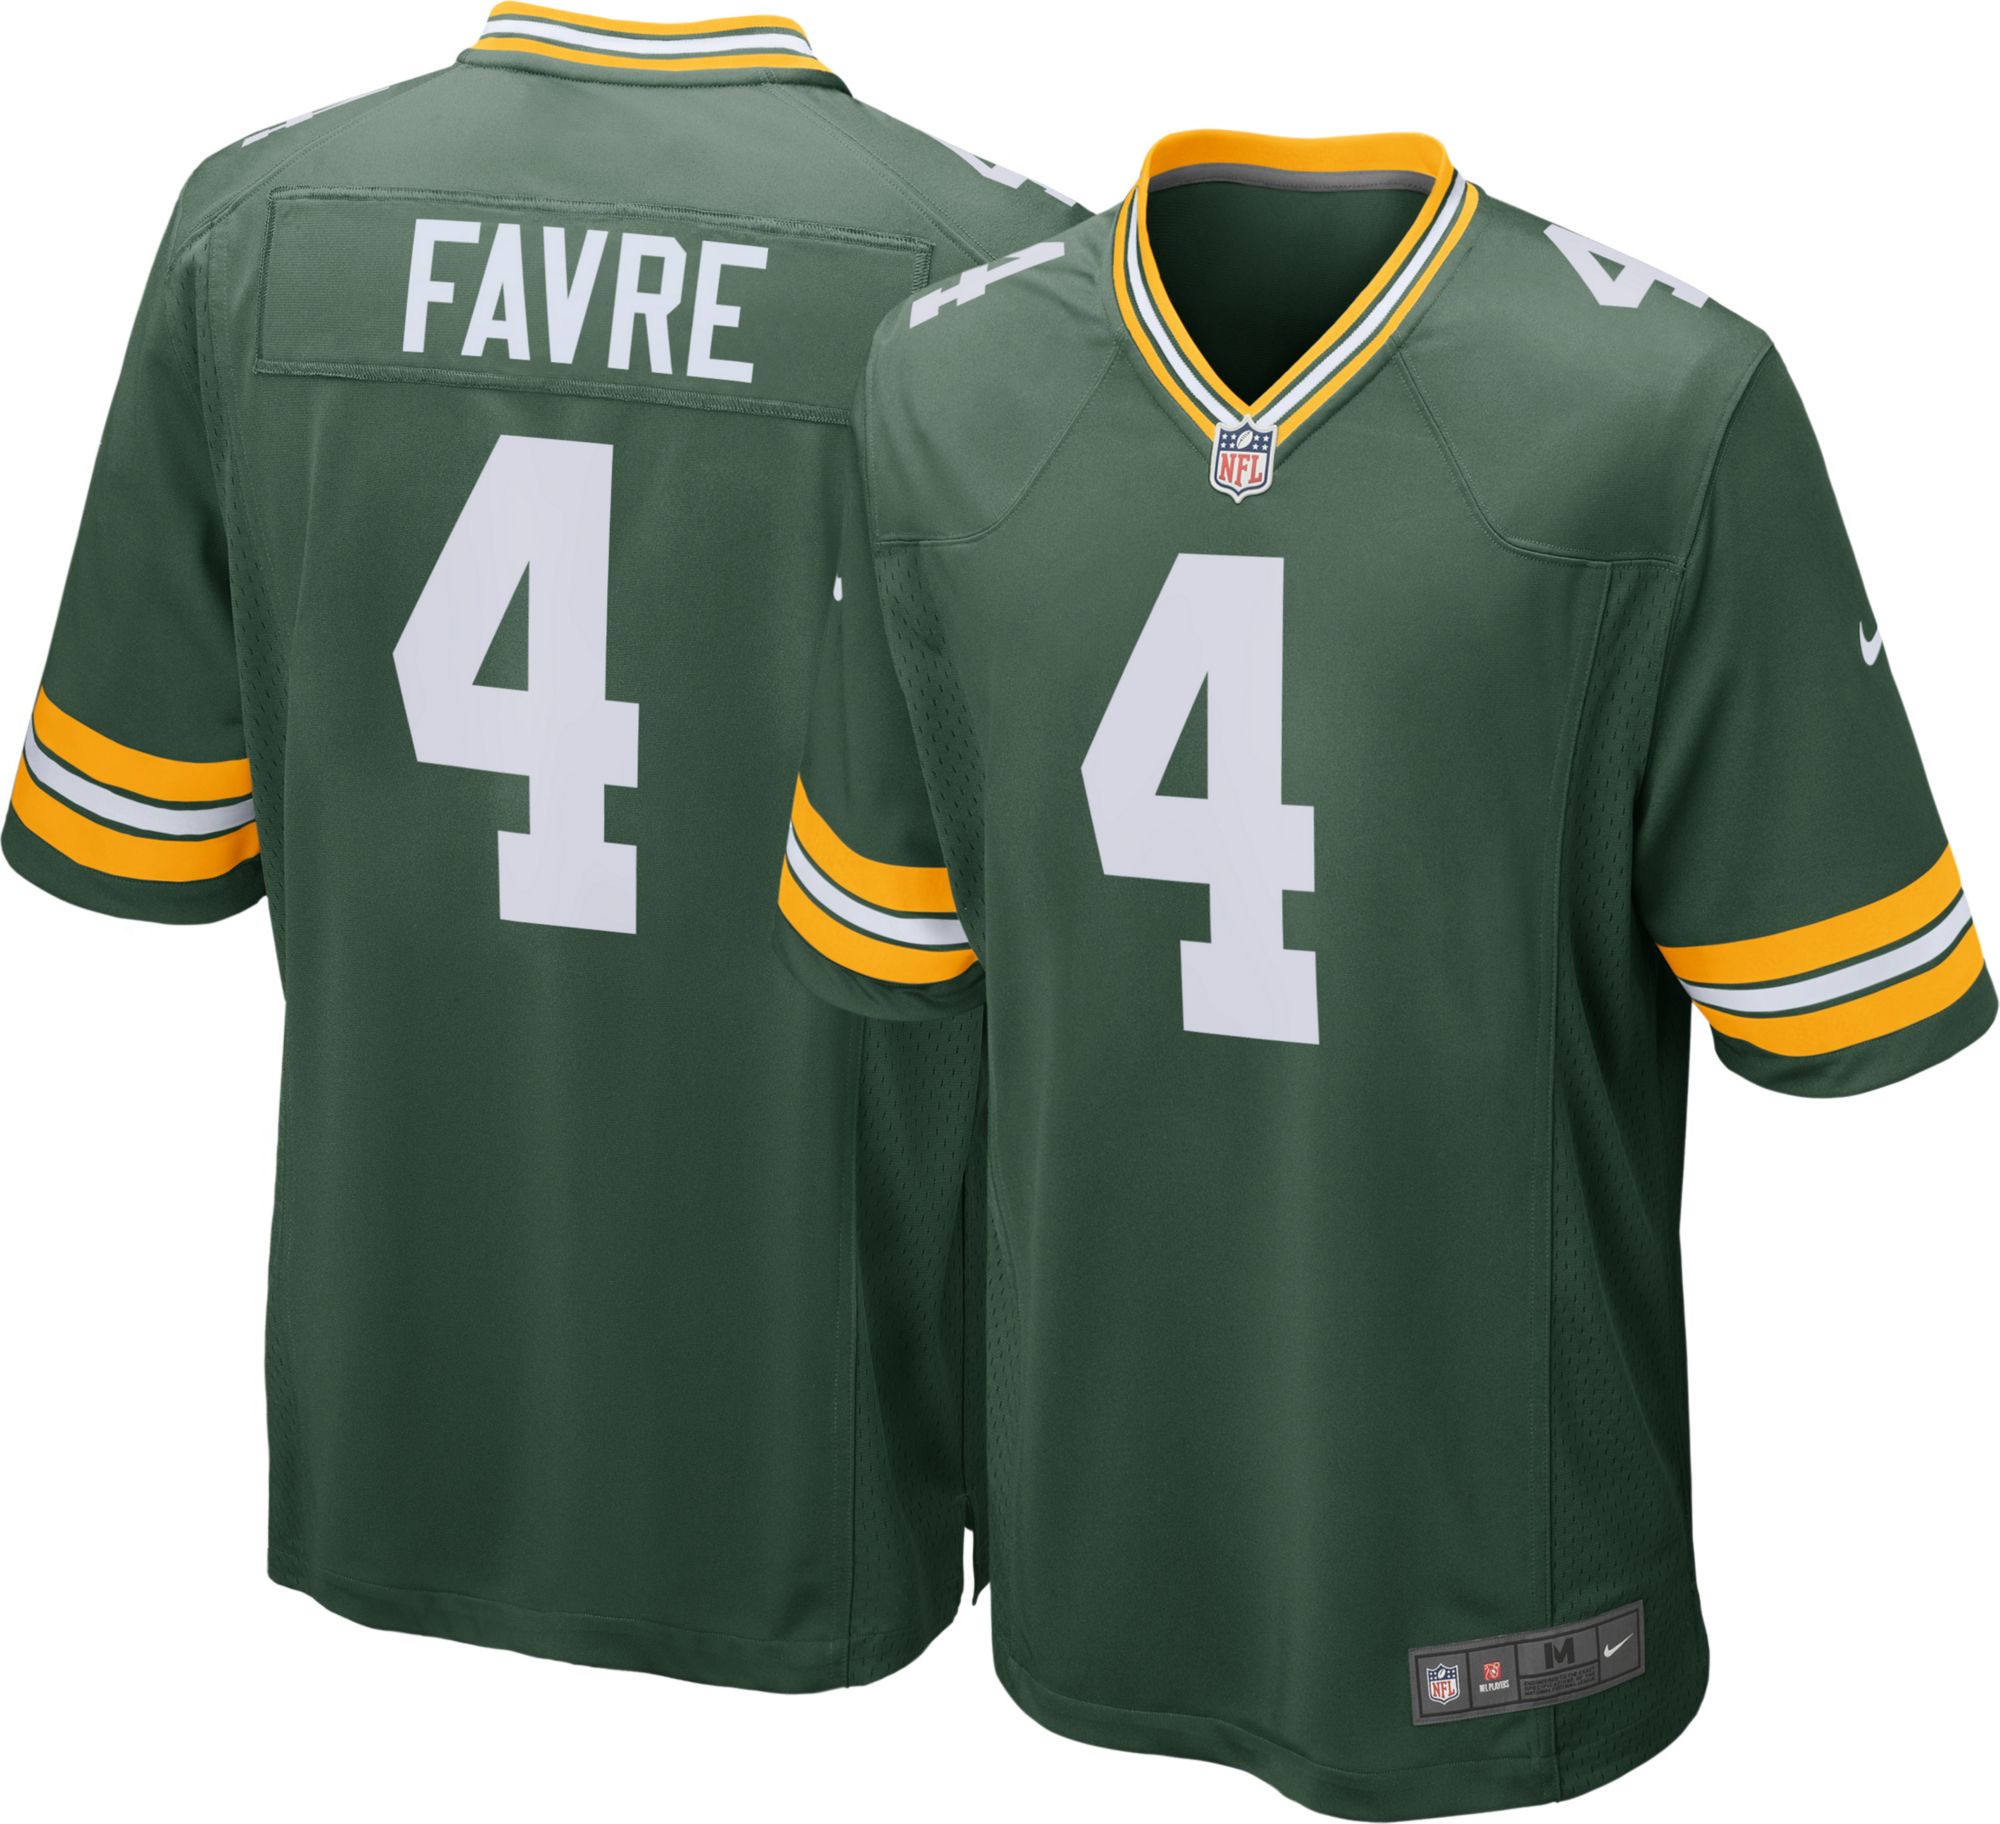 throwback jerseys green bay packers